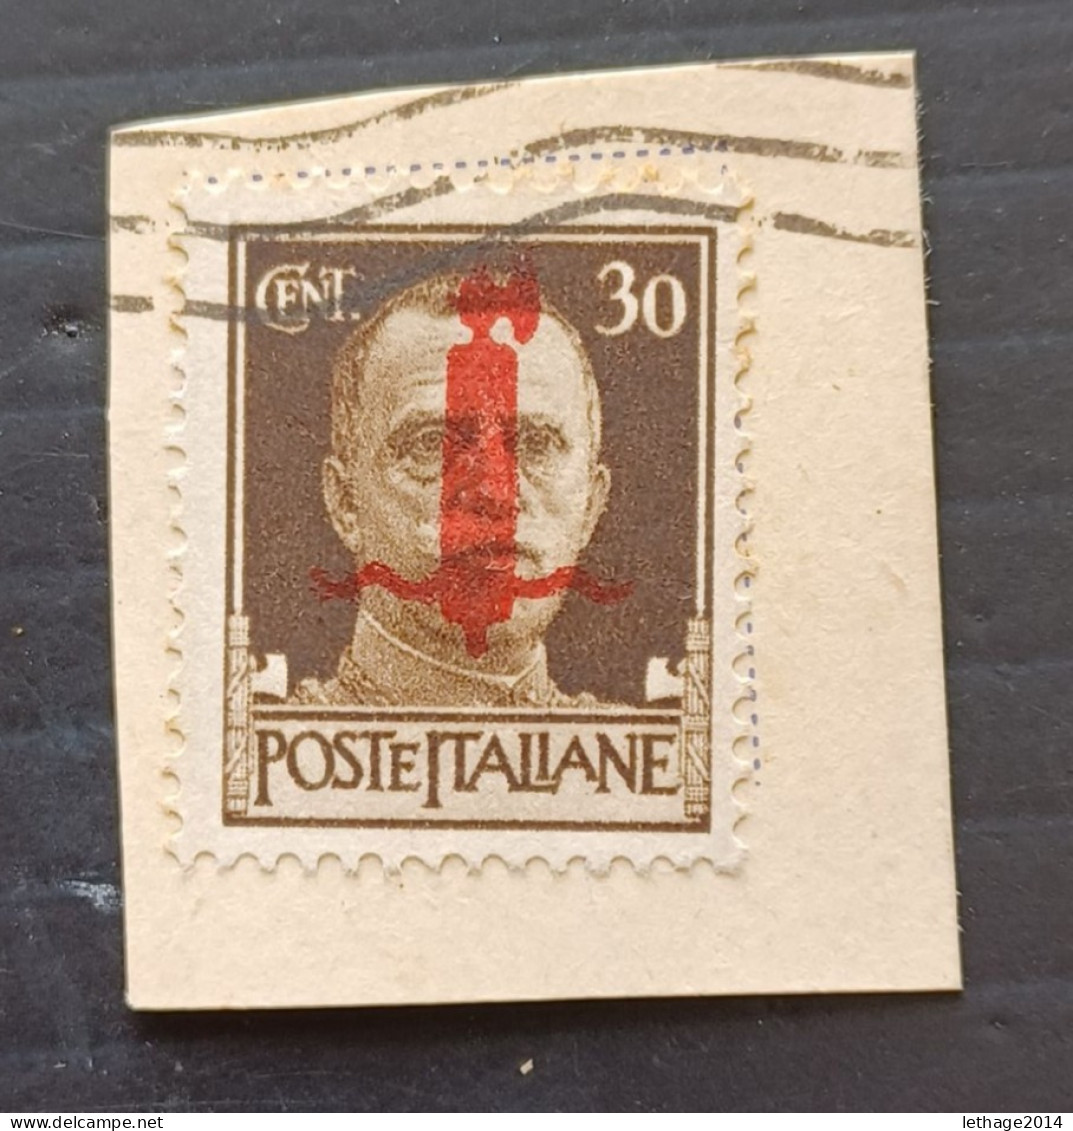 REGNO D ITALIA 1944 SERIE IMPERIALE SASS. N 492 --- GIULY - Afgestempeld